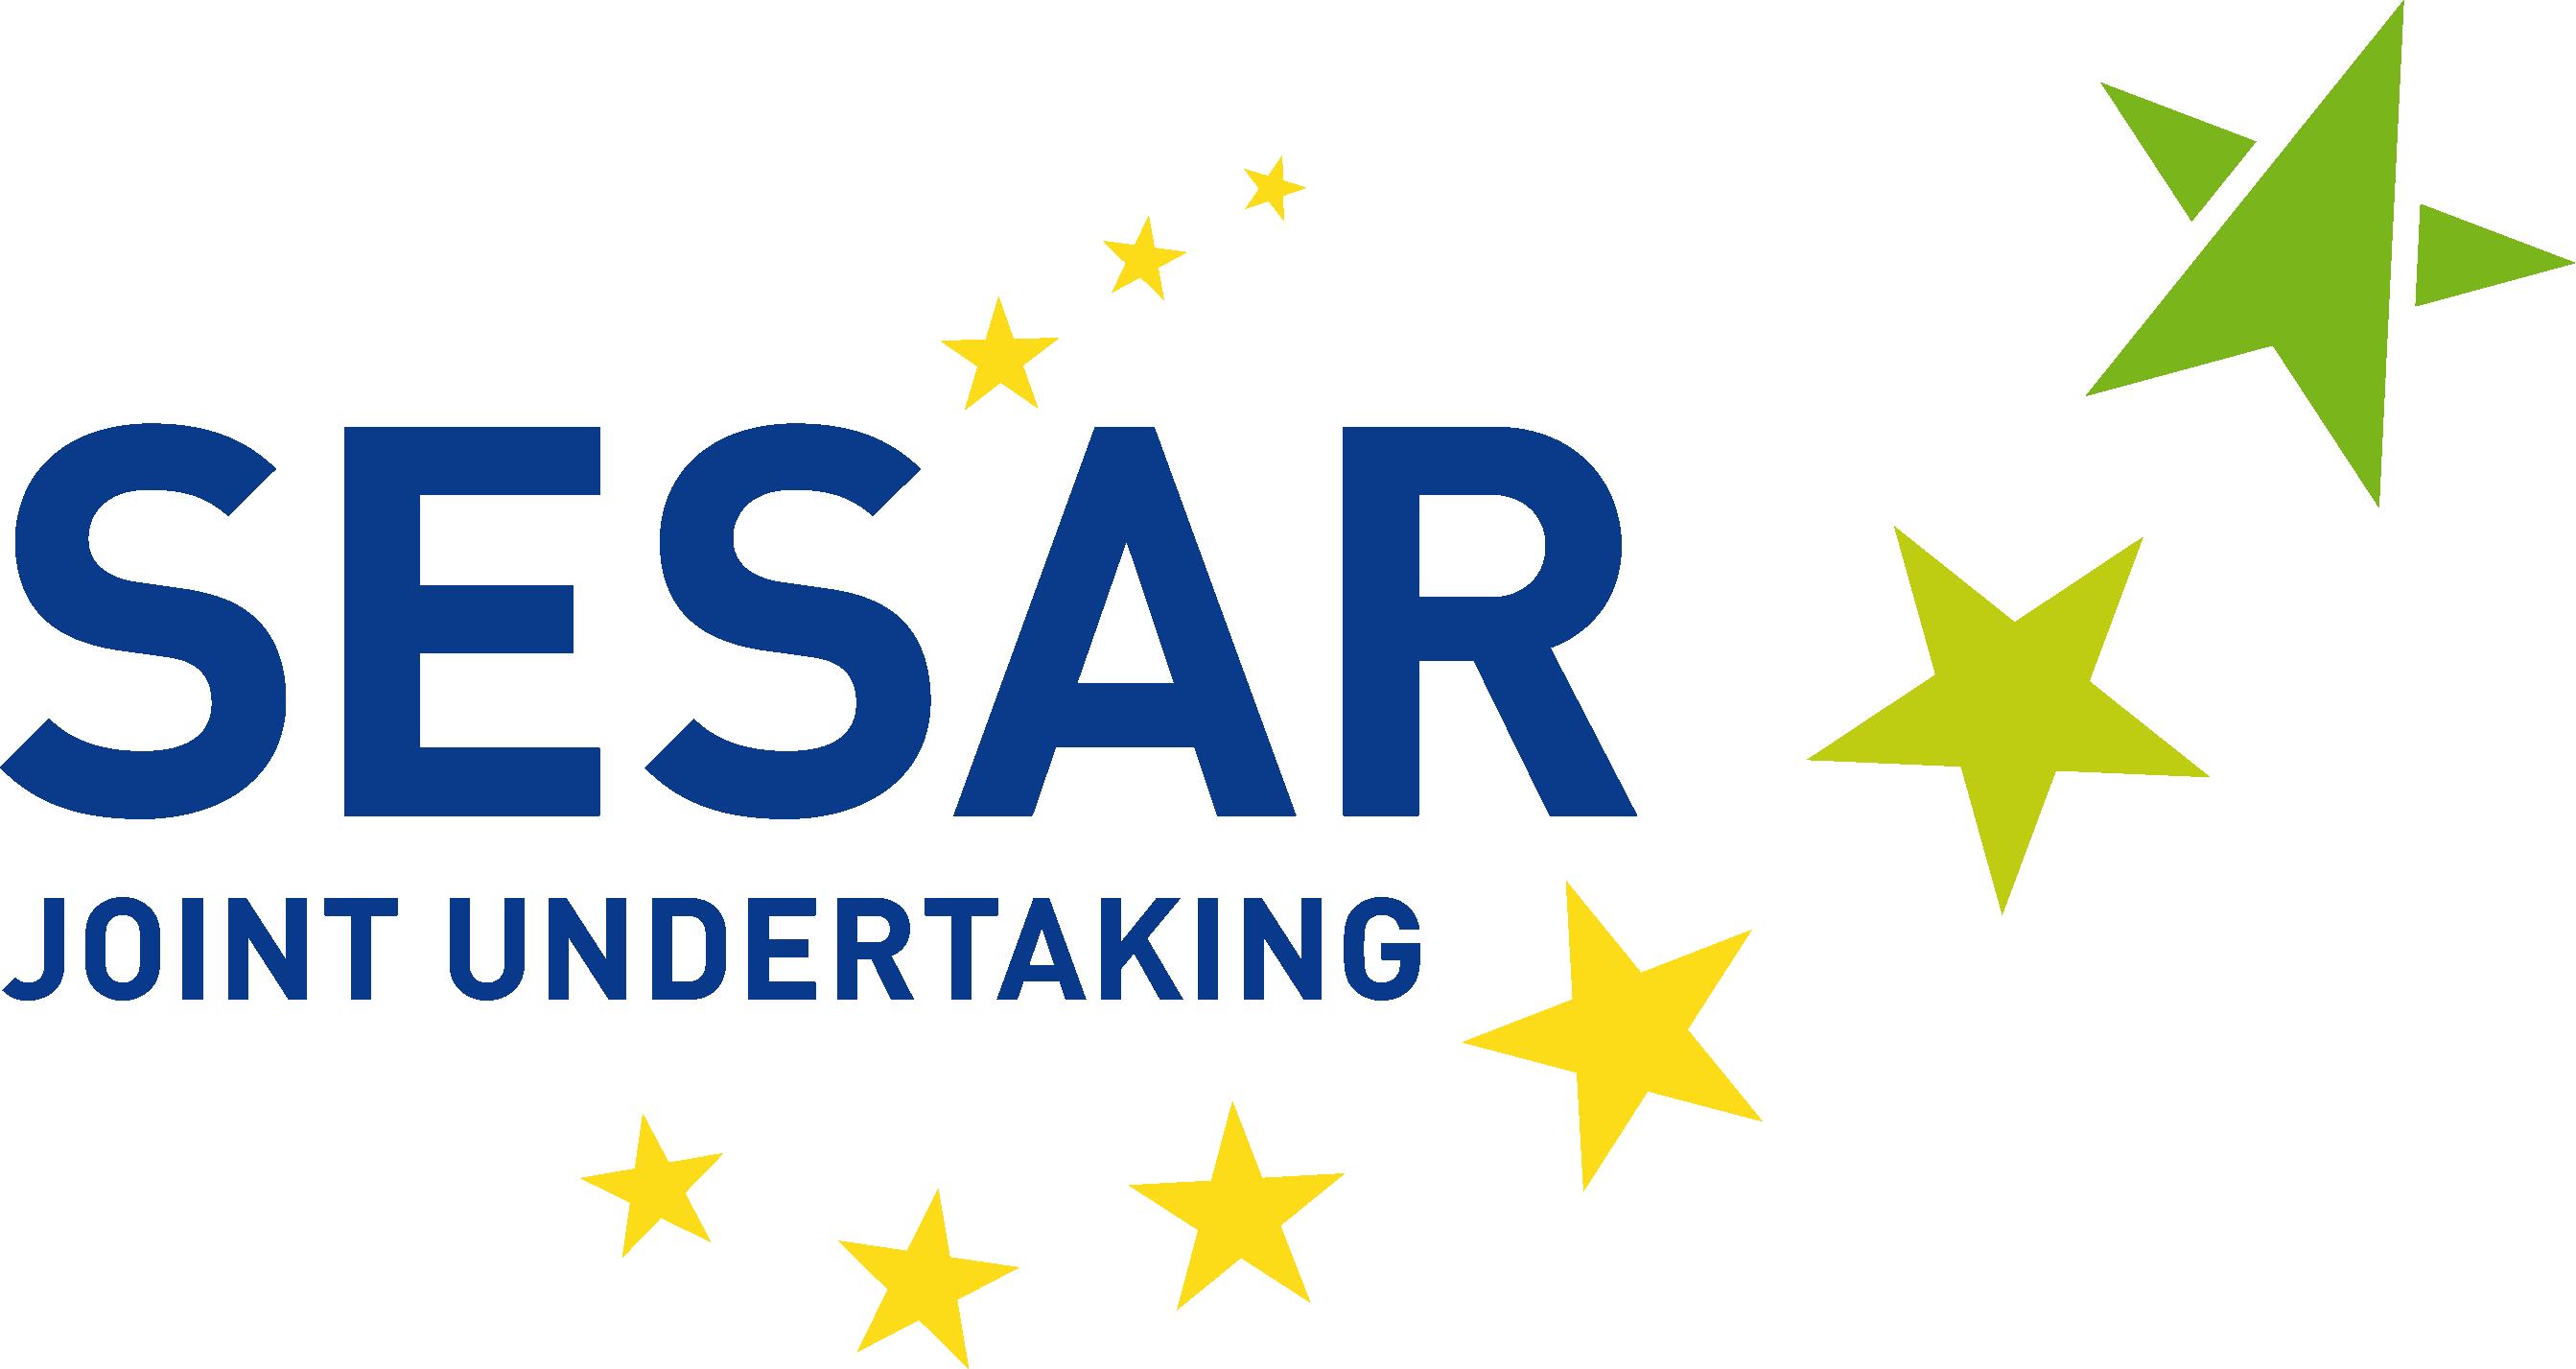 Ms. Claude-France Arnould attended the SESAR Forum